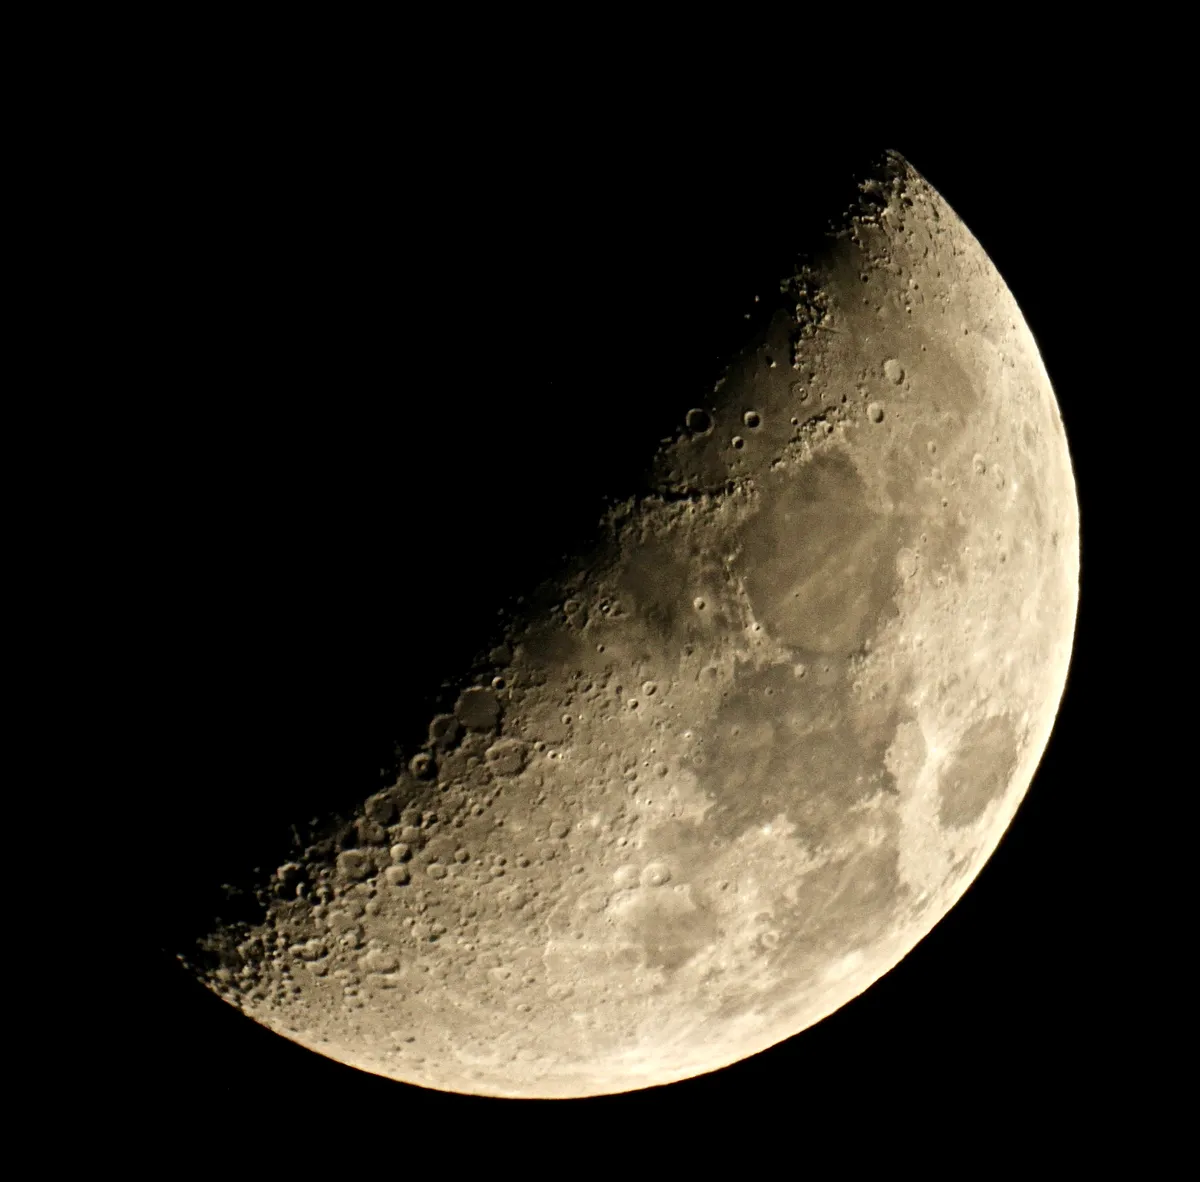 First Quarter Moon by Sarah & Simon Fisher, Bromsgrove, Worcestershire, UK. Equipment: Canon 600D, Maksutov 127mm